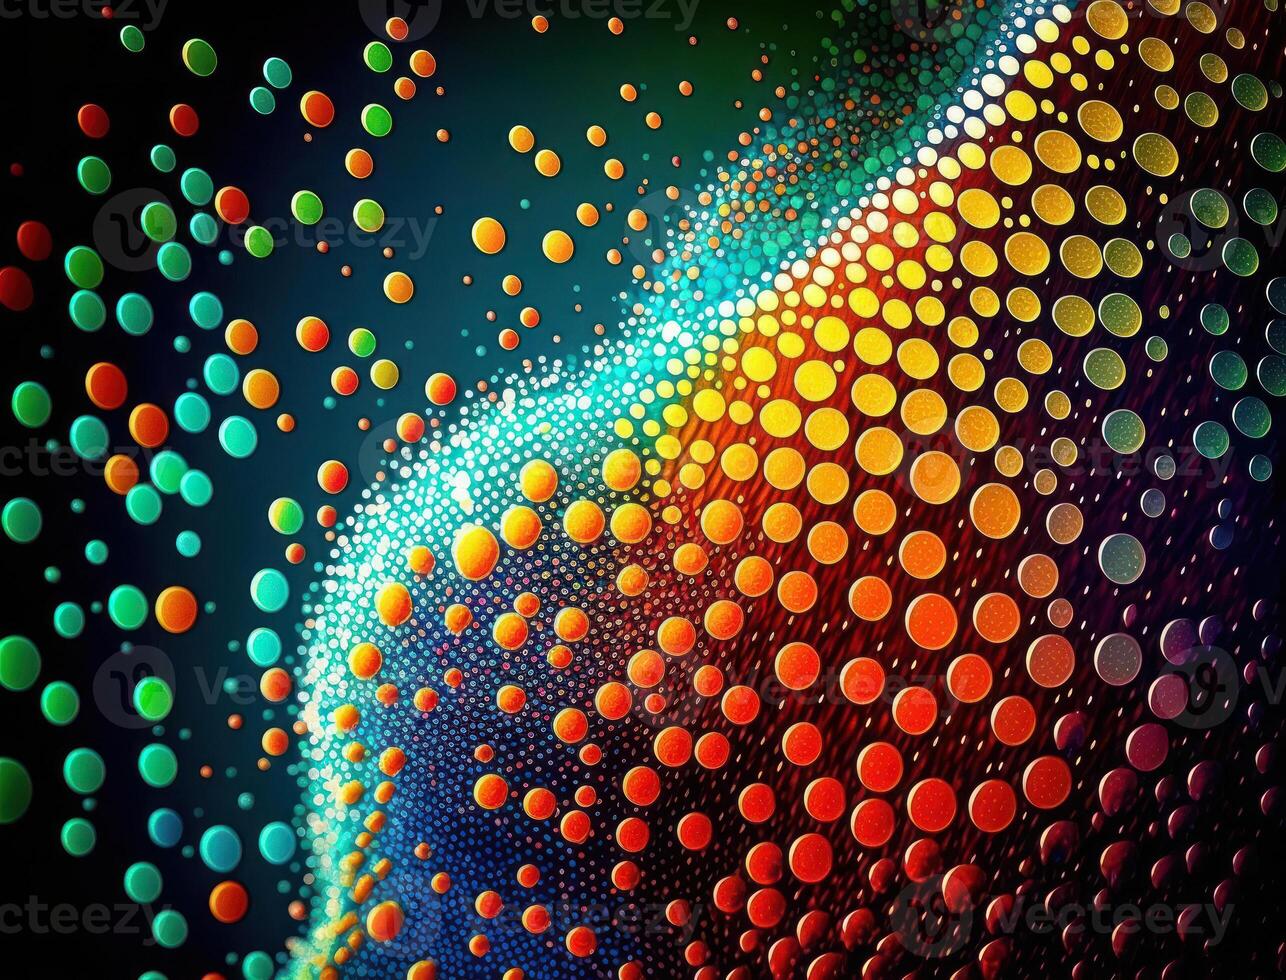 Colorful abstract geometric background with dot shapes pointillism style created with technology photo